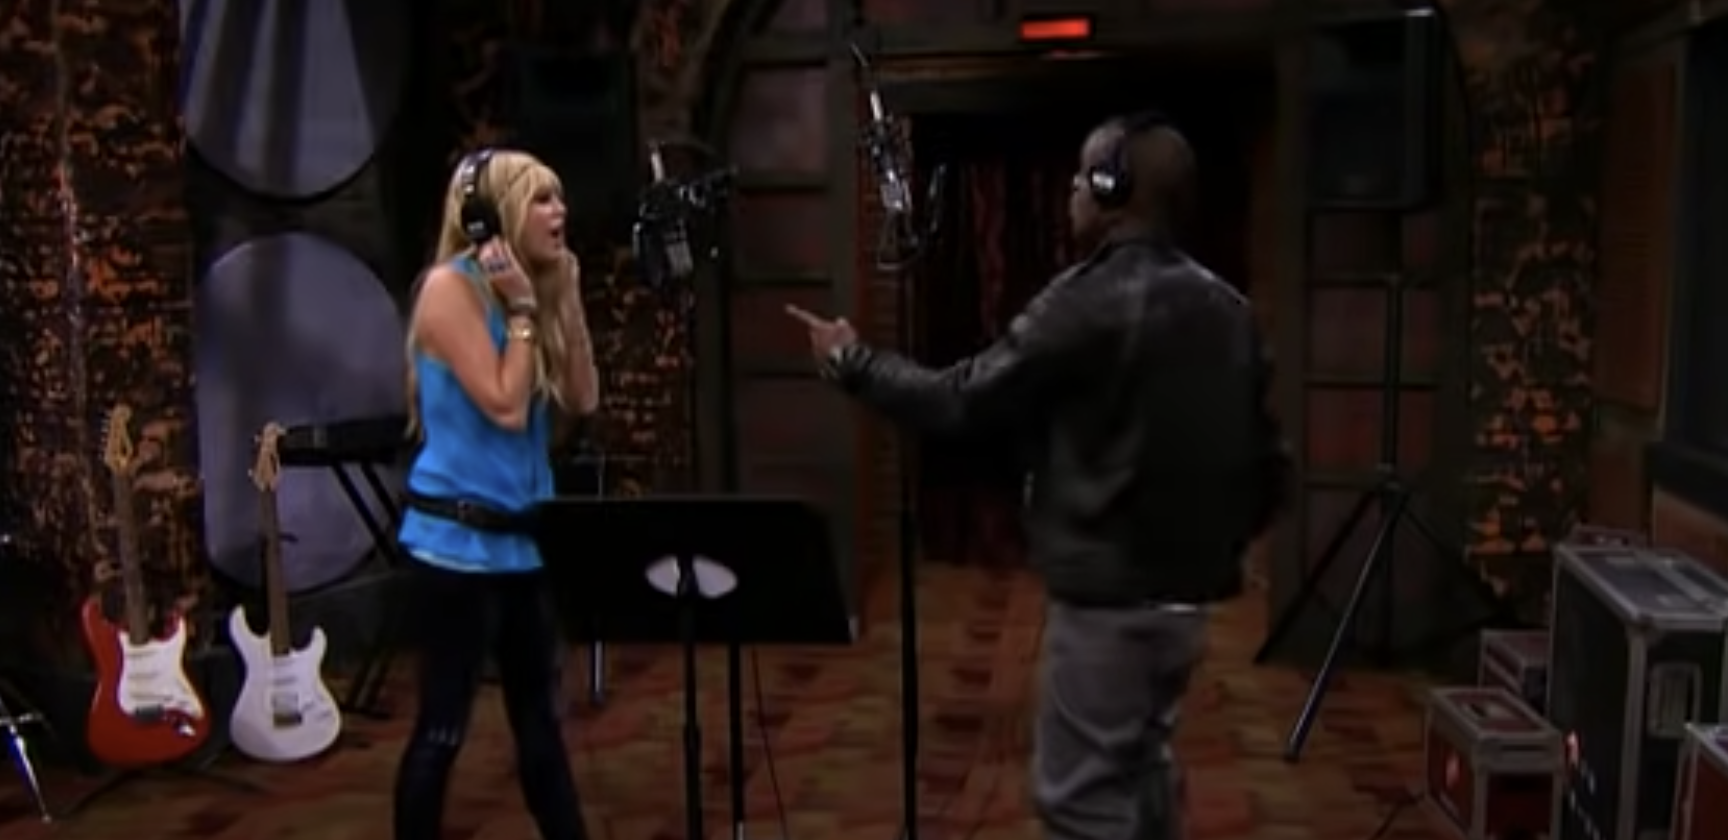 Hannah Montana and Iyaz are singing together in a recording studio